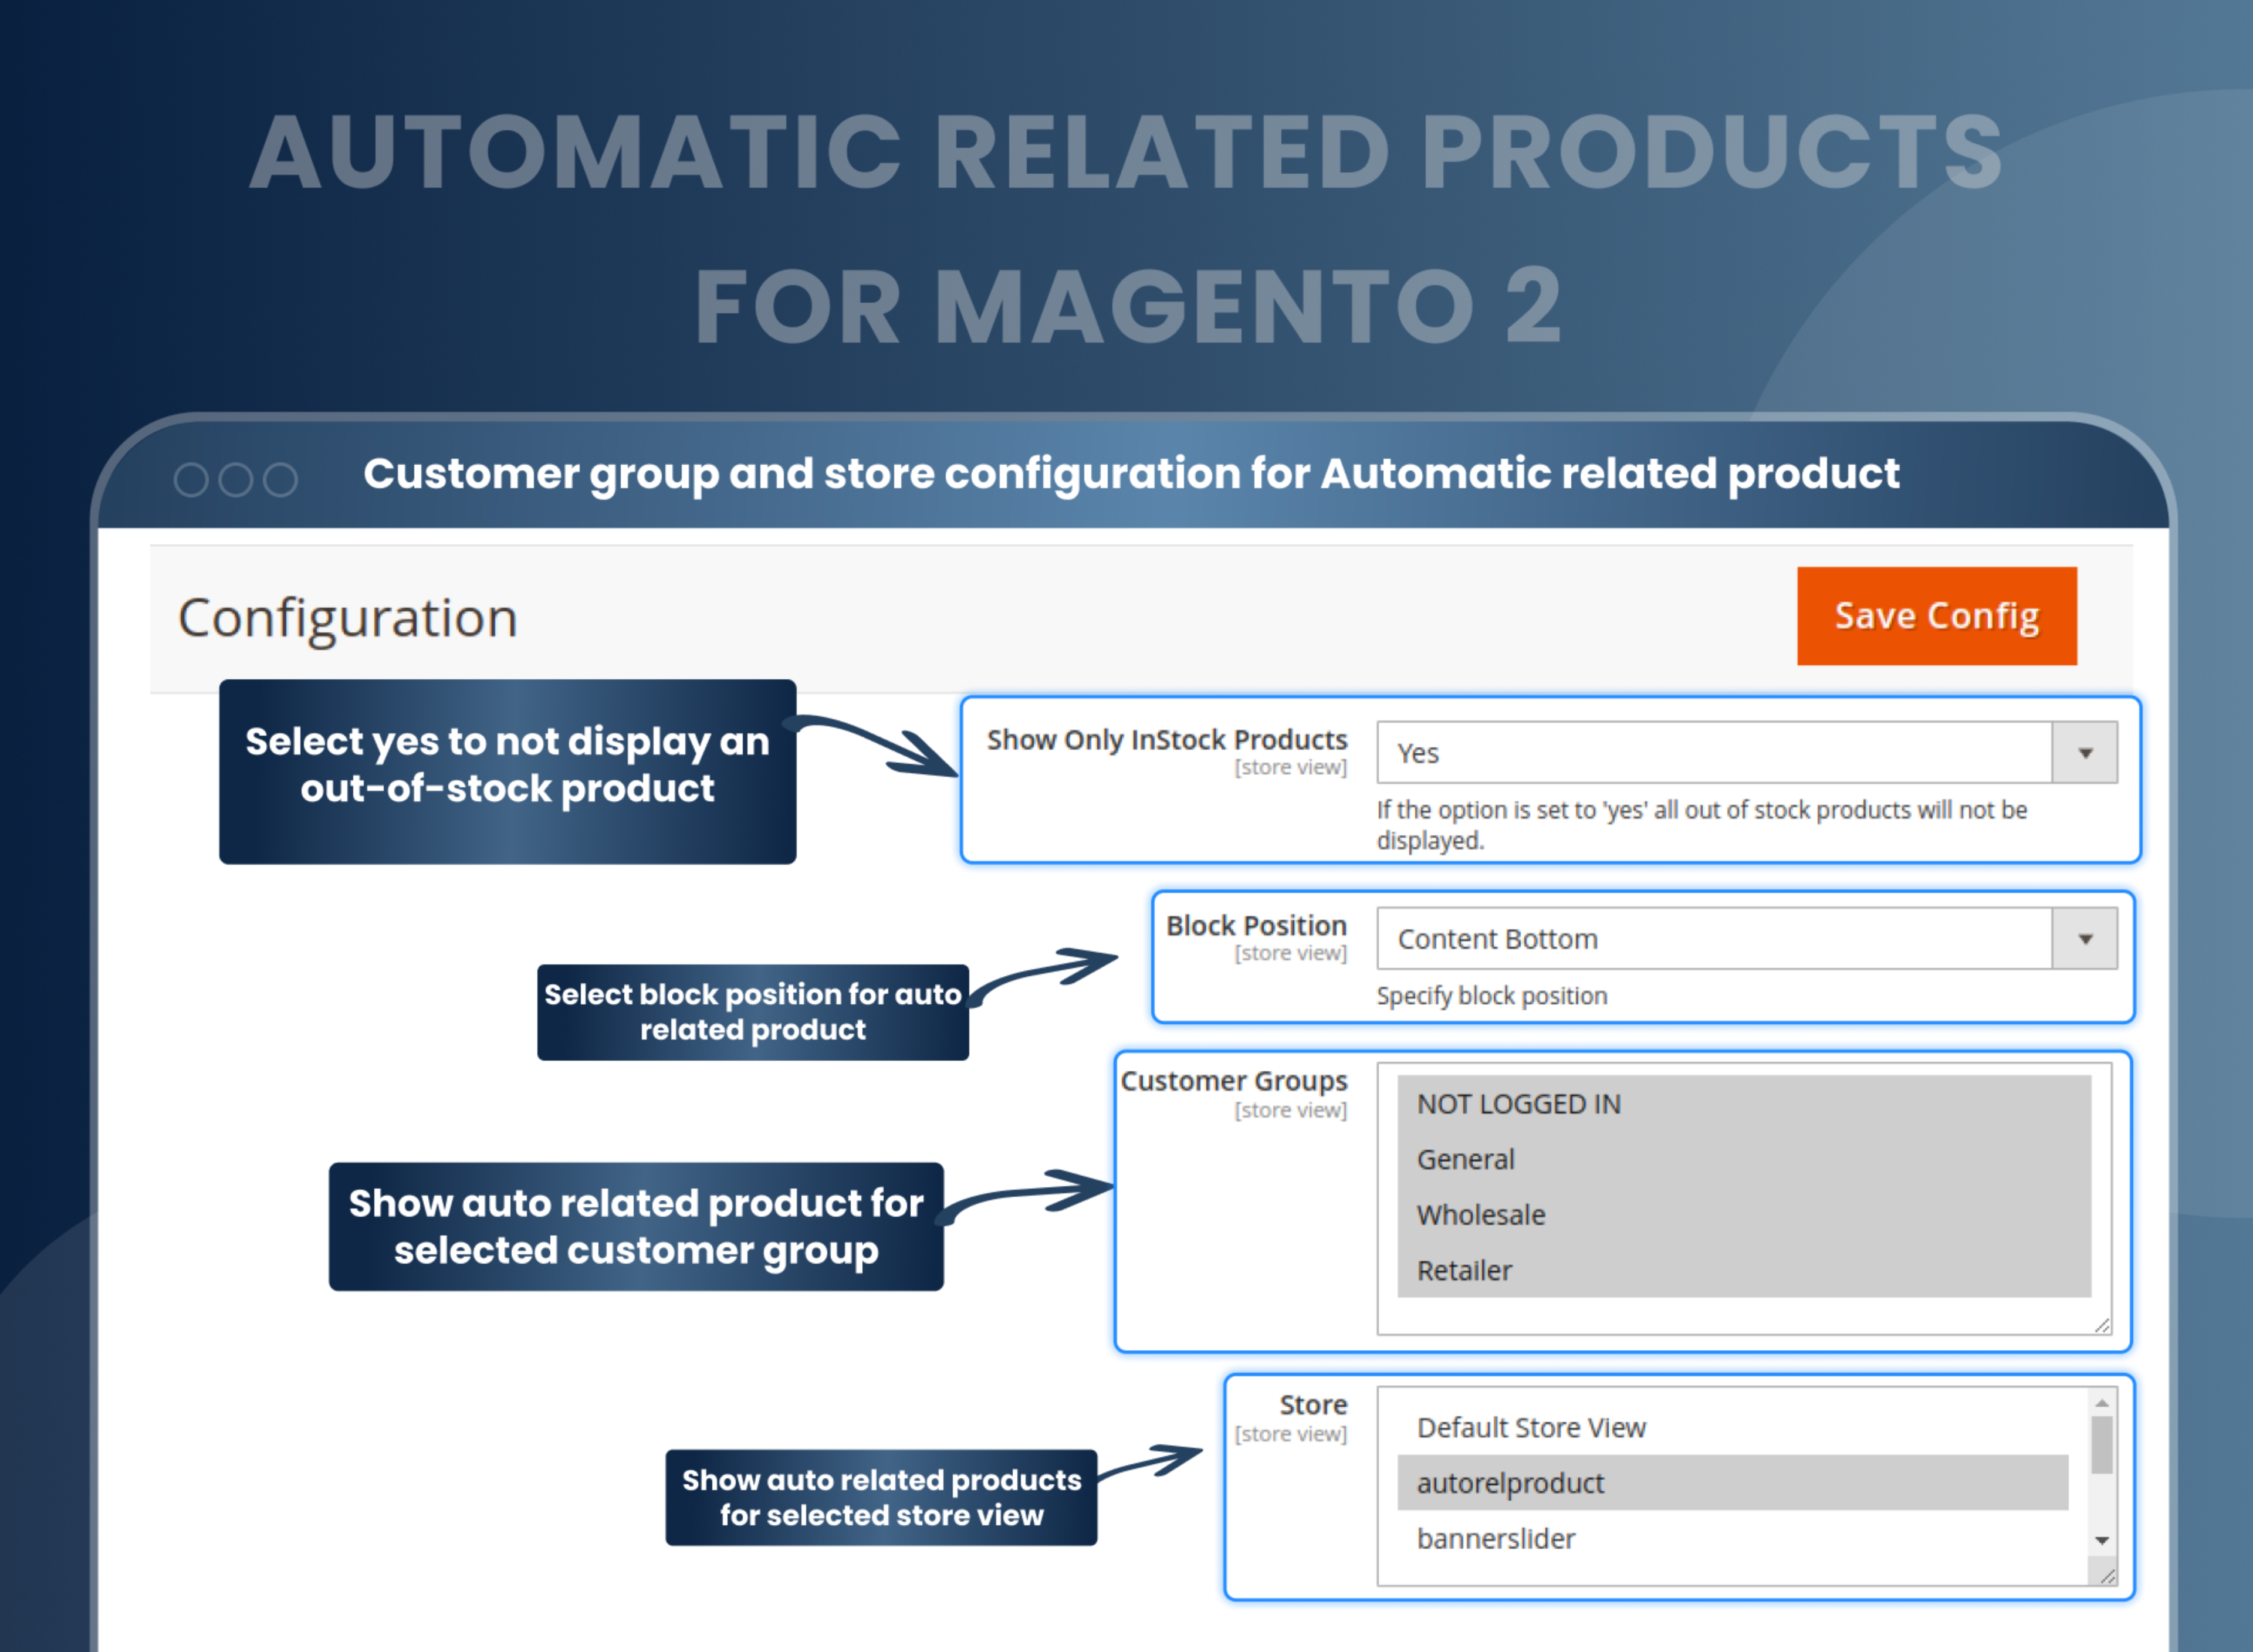  CUstomer group and store configuration for Automatic related product